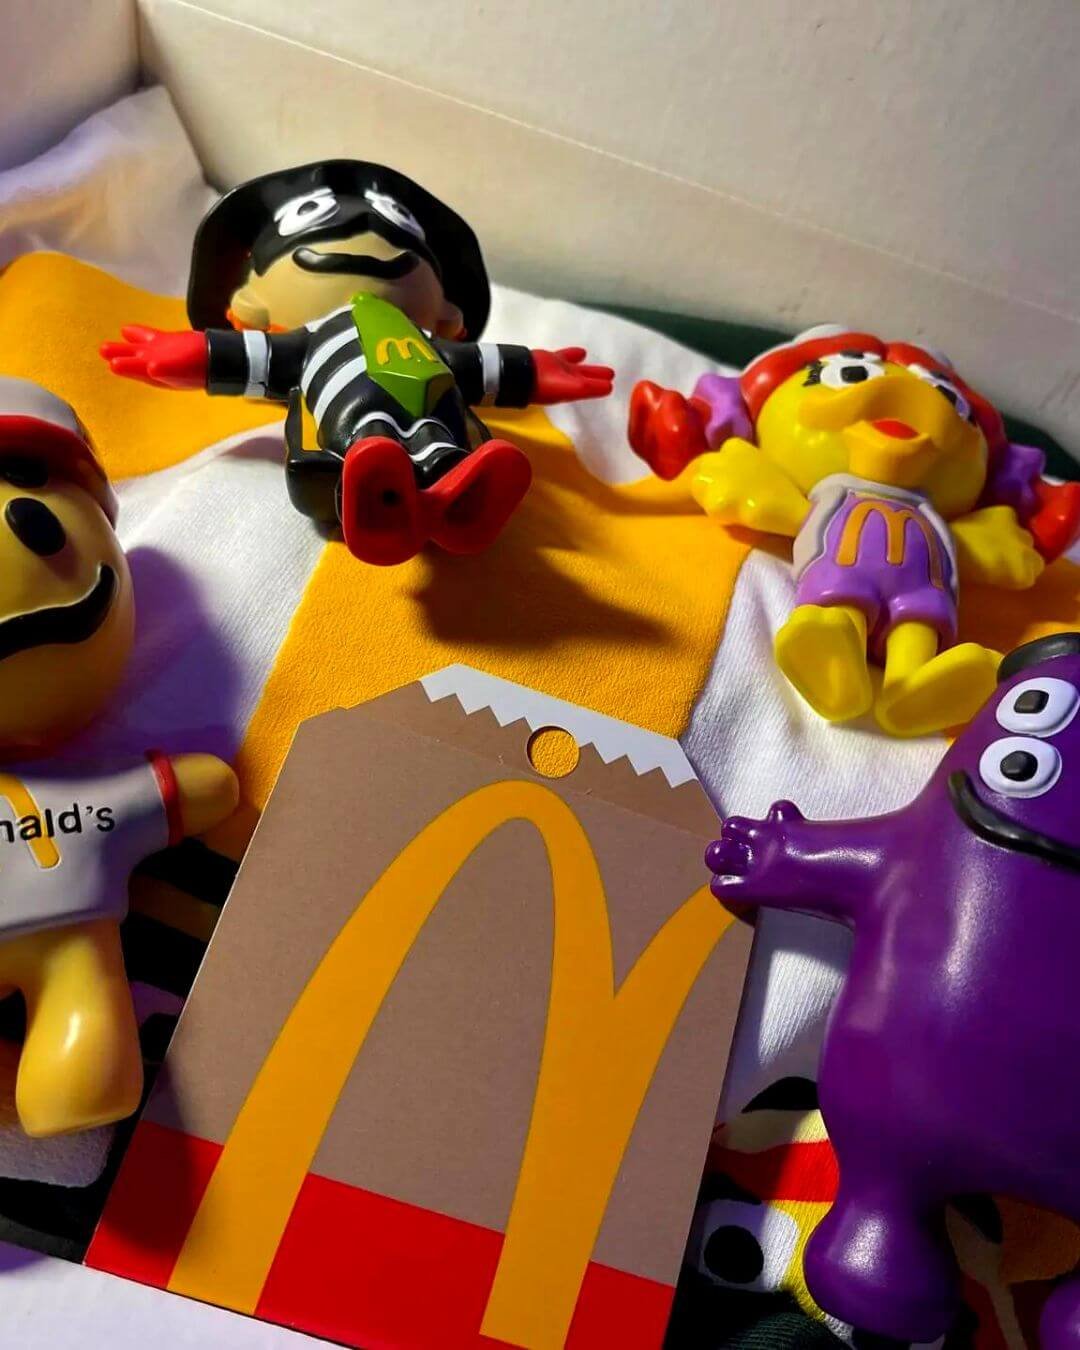 McDonald's Adult Meal With Toys